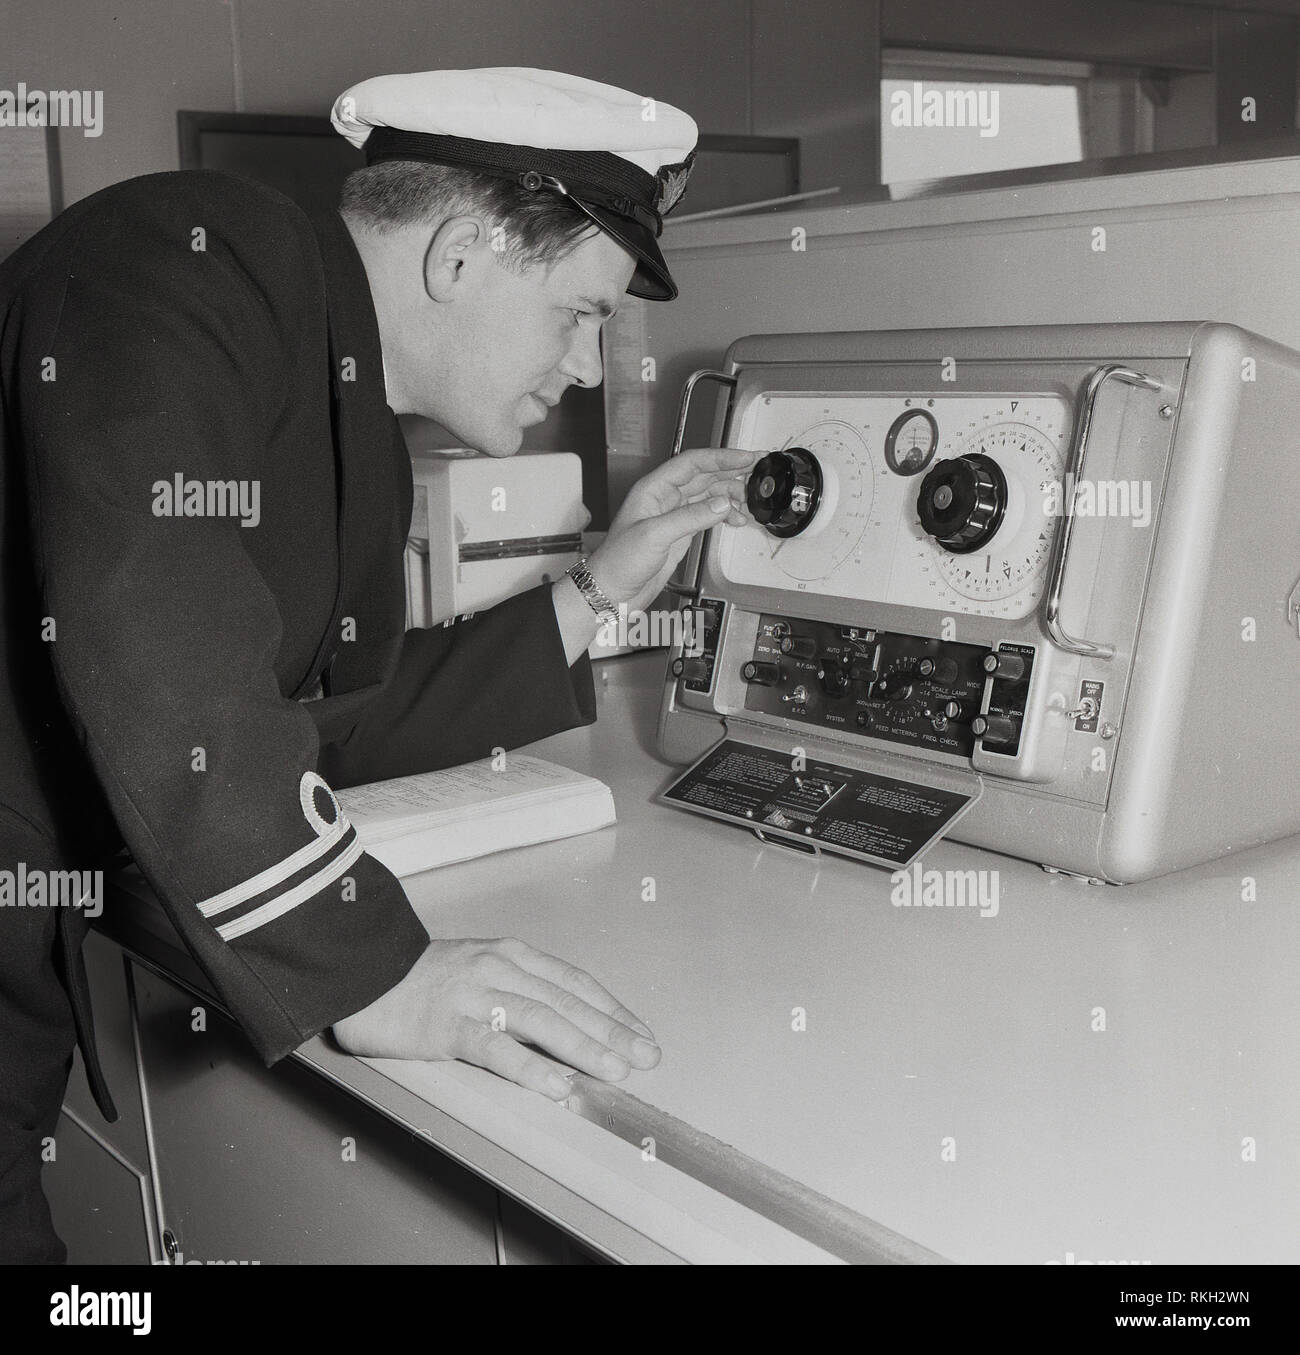 1960s, uniformed male officer on a Union-Castle steamship, using an automatic direction finder (ADF), a marine radio-navigational instrument that automatically and continously displays the relative bearing of the ship to a suitable radio station, technology that was developed in the 1960s. Stock Photo